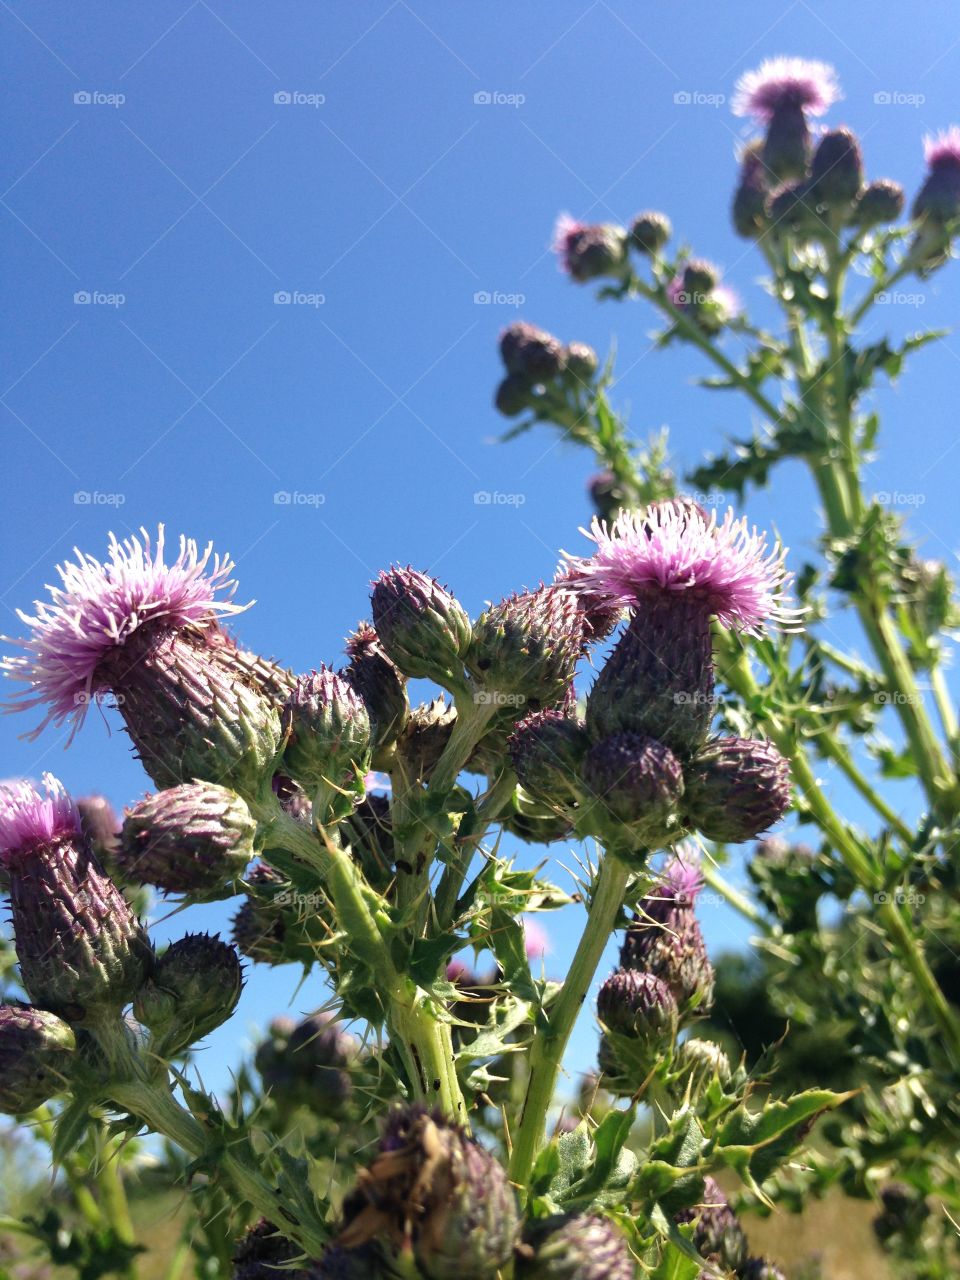 Prickly thistle 